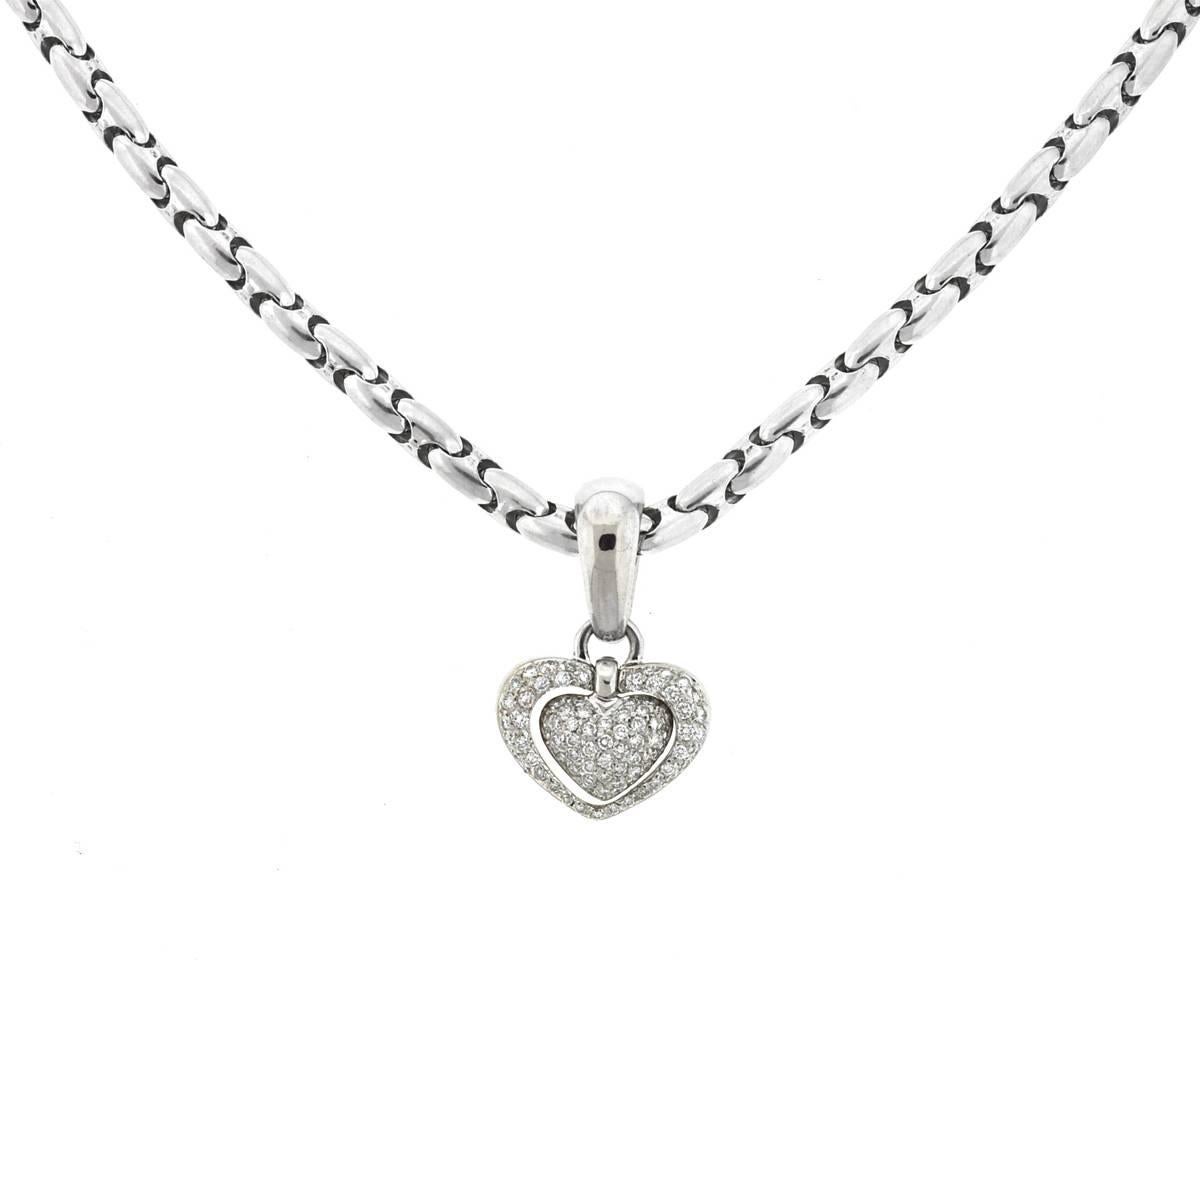 Company - Chimento
Style - Pave Diamond Heart Necklace
Metal - 18k White Gold
Weight - 41.3 grams
Stones - Diamonds - approx. 1.0 cts - Chain length - 17